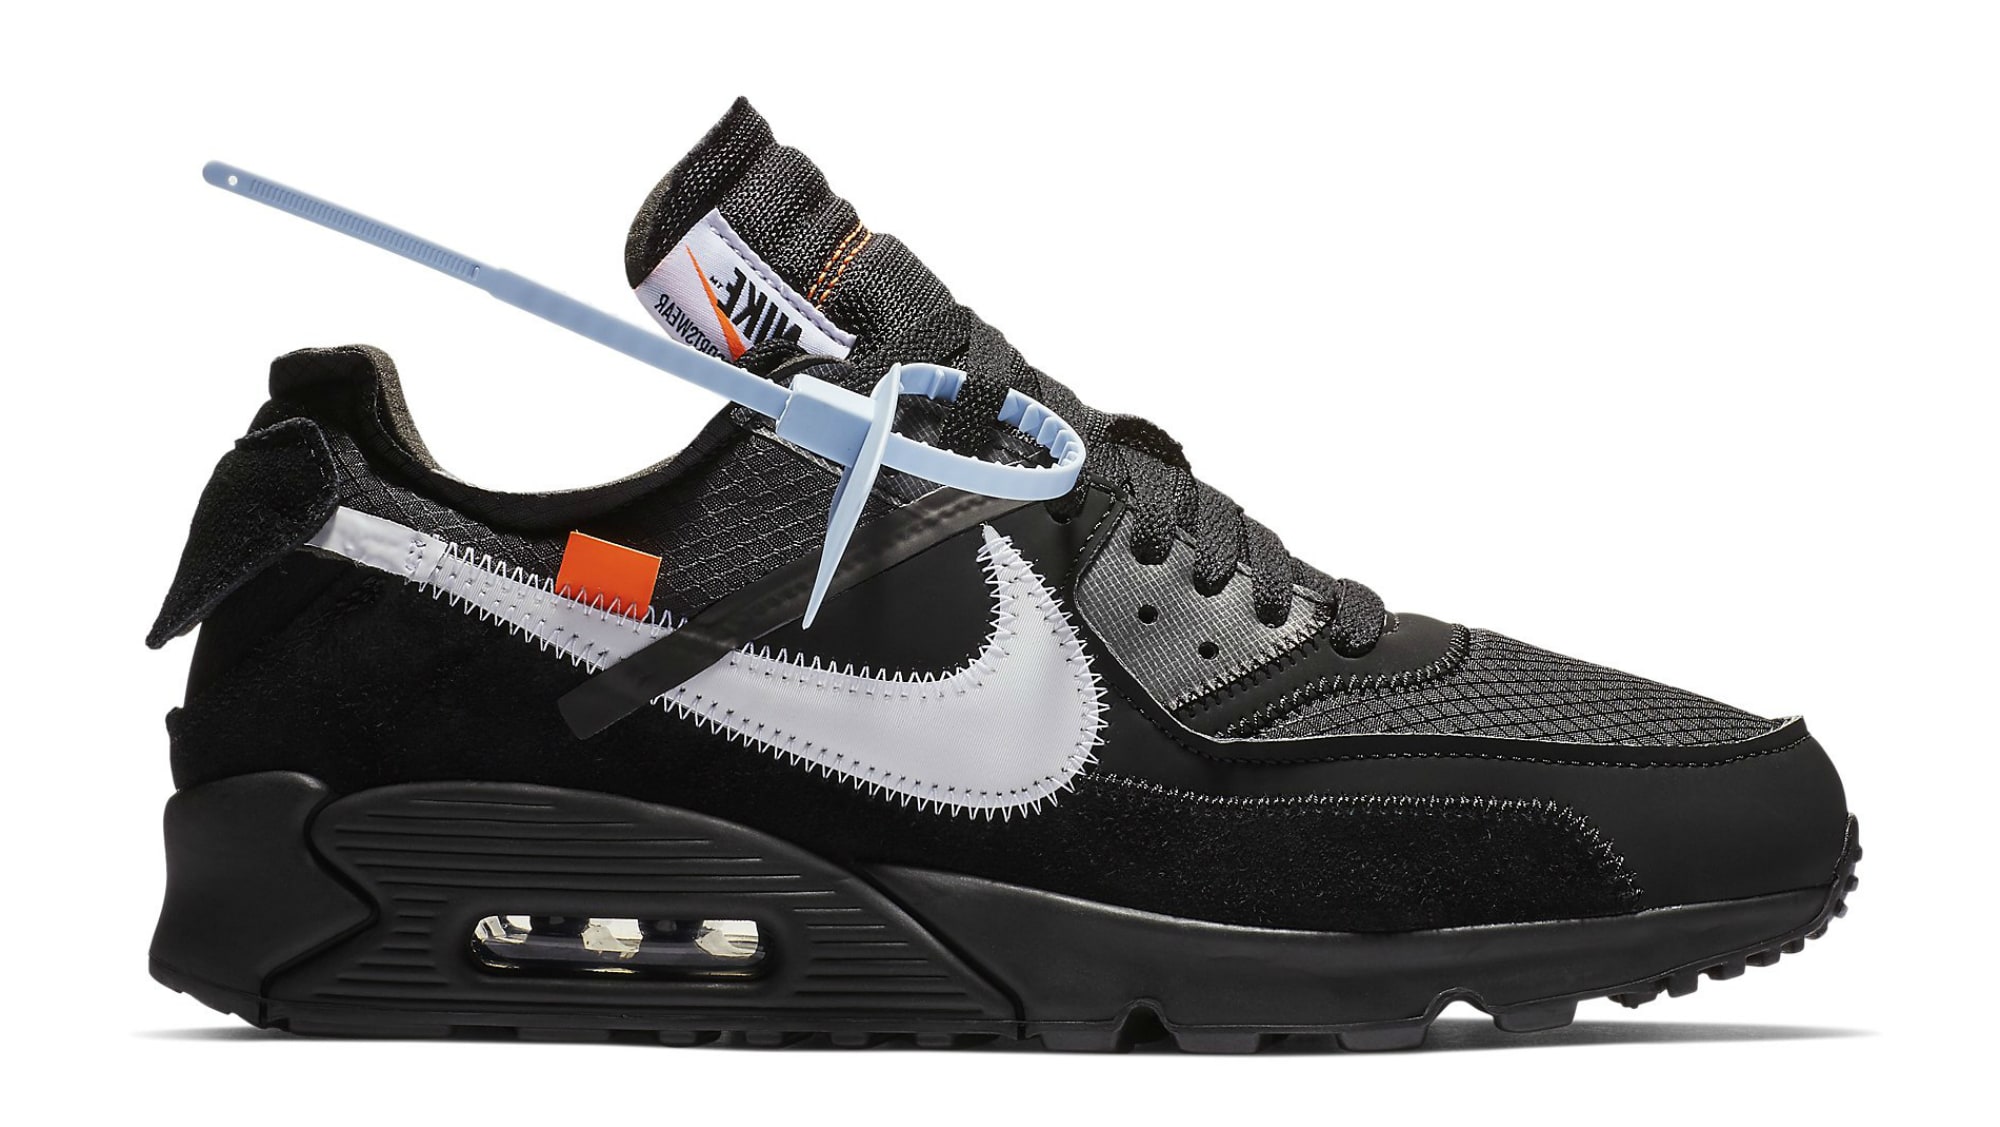 off-white-nike-air-max-90-black-aa7293-001-release-date